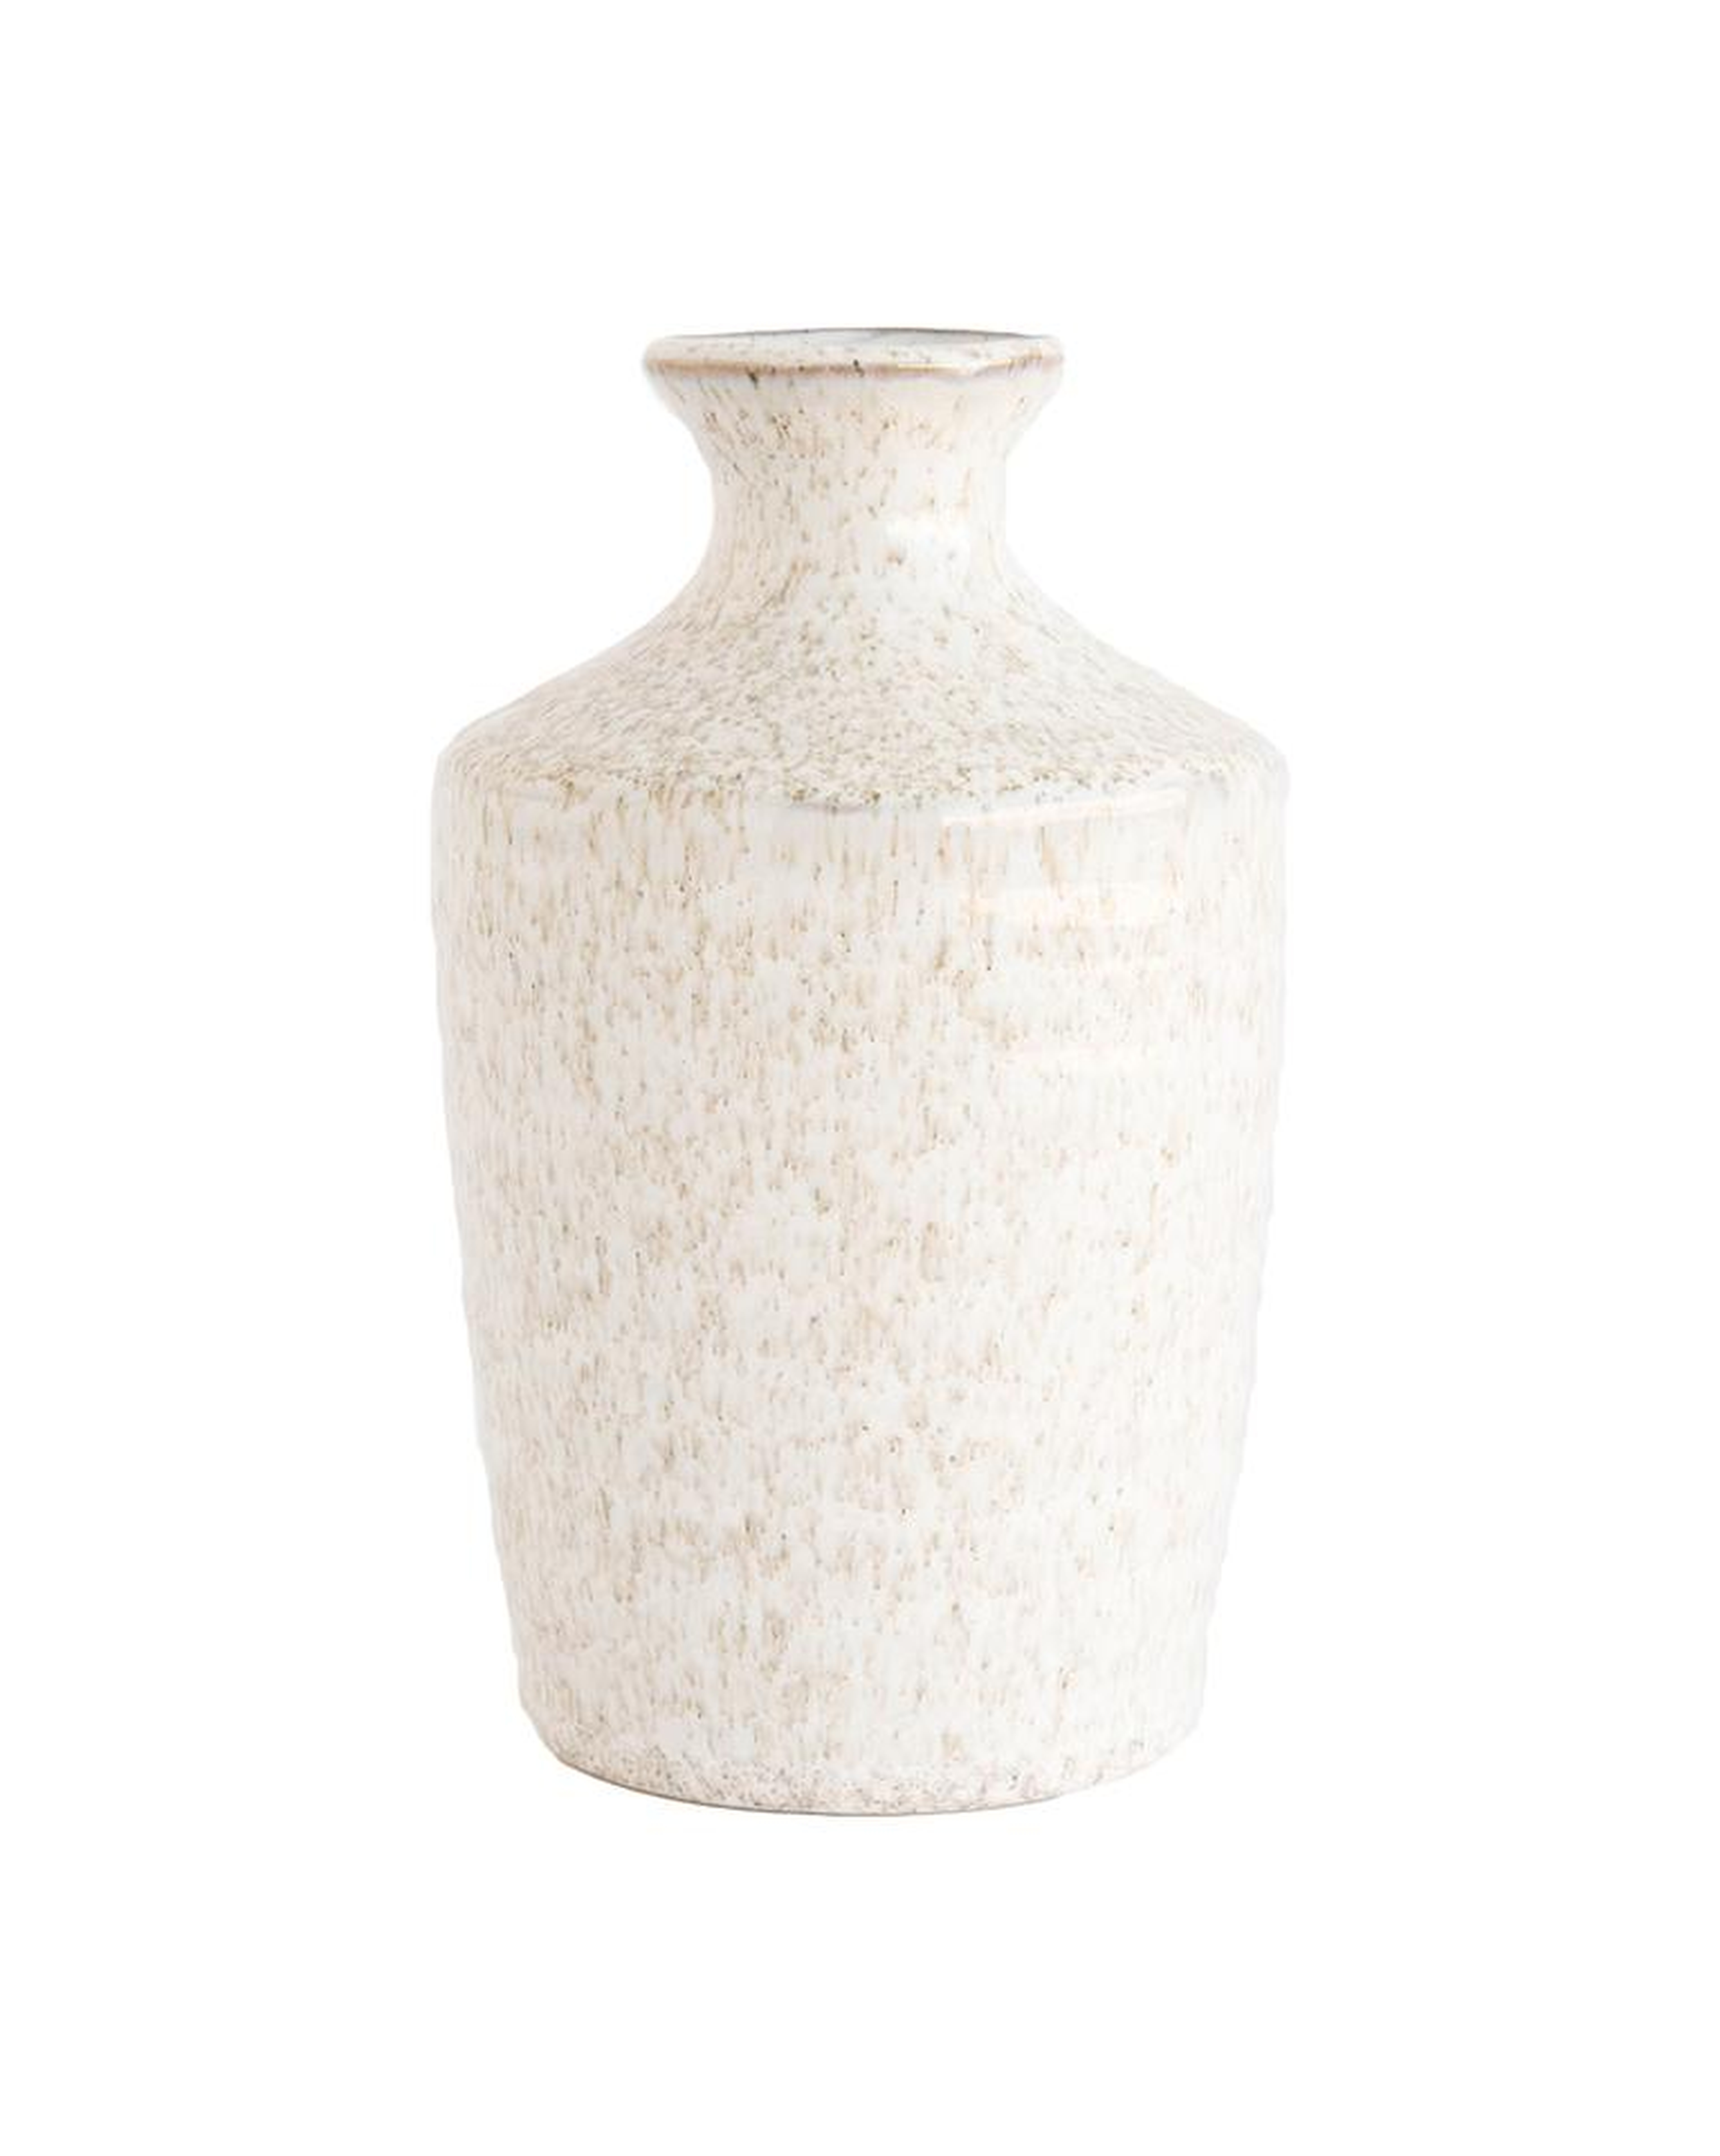 FRECKLED BUDVASE - 6.25"H - McGee & Co.